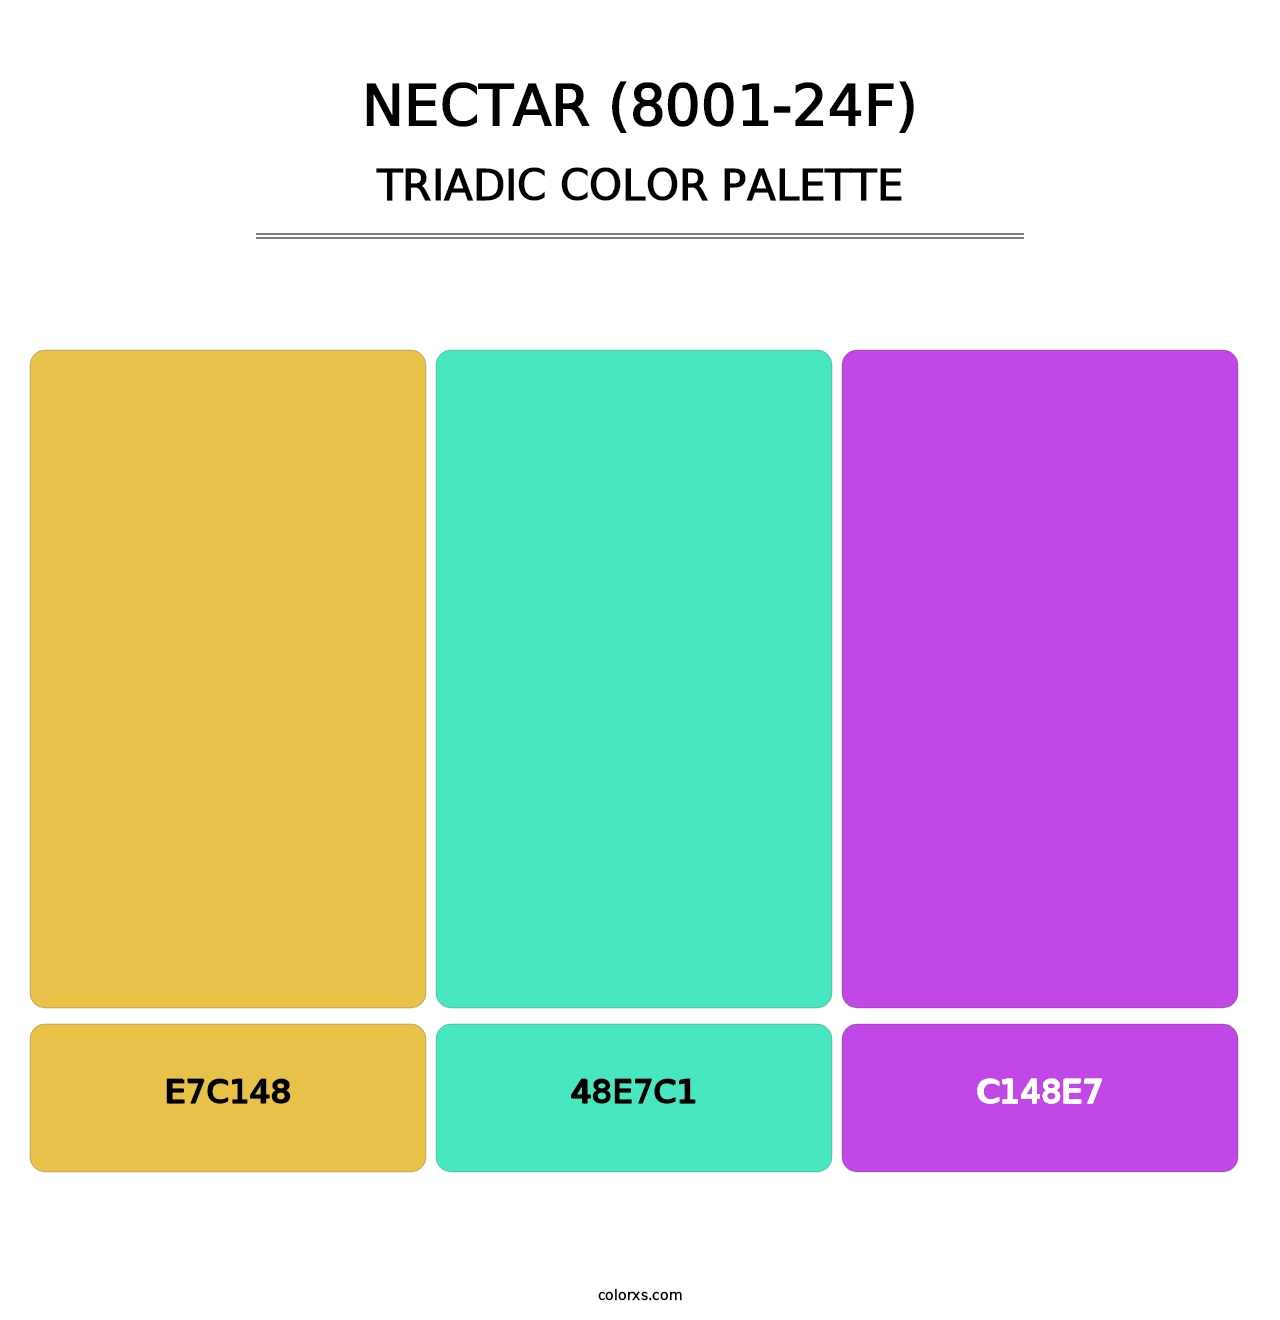 Nectar (8001-24F) - Triadic Color Palette